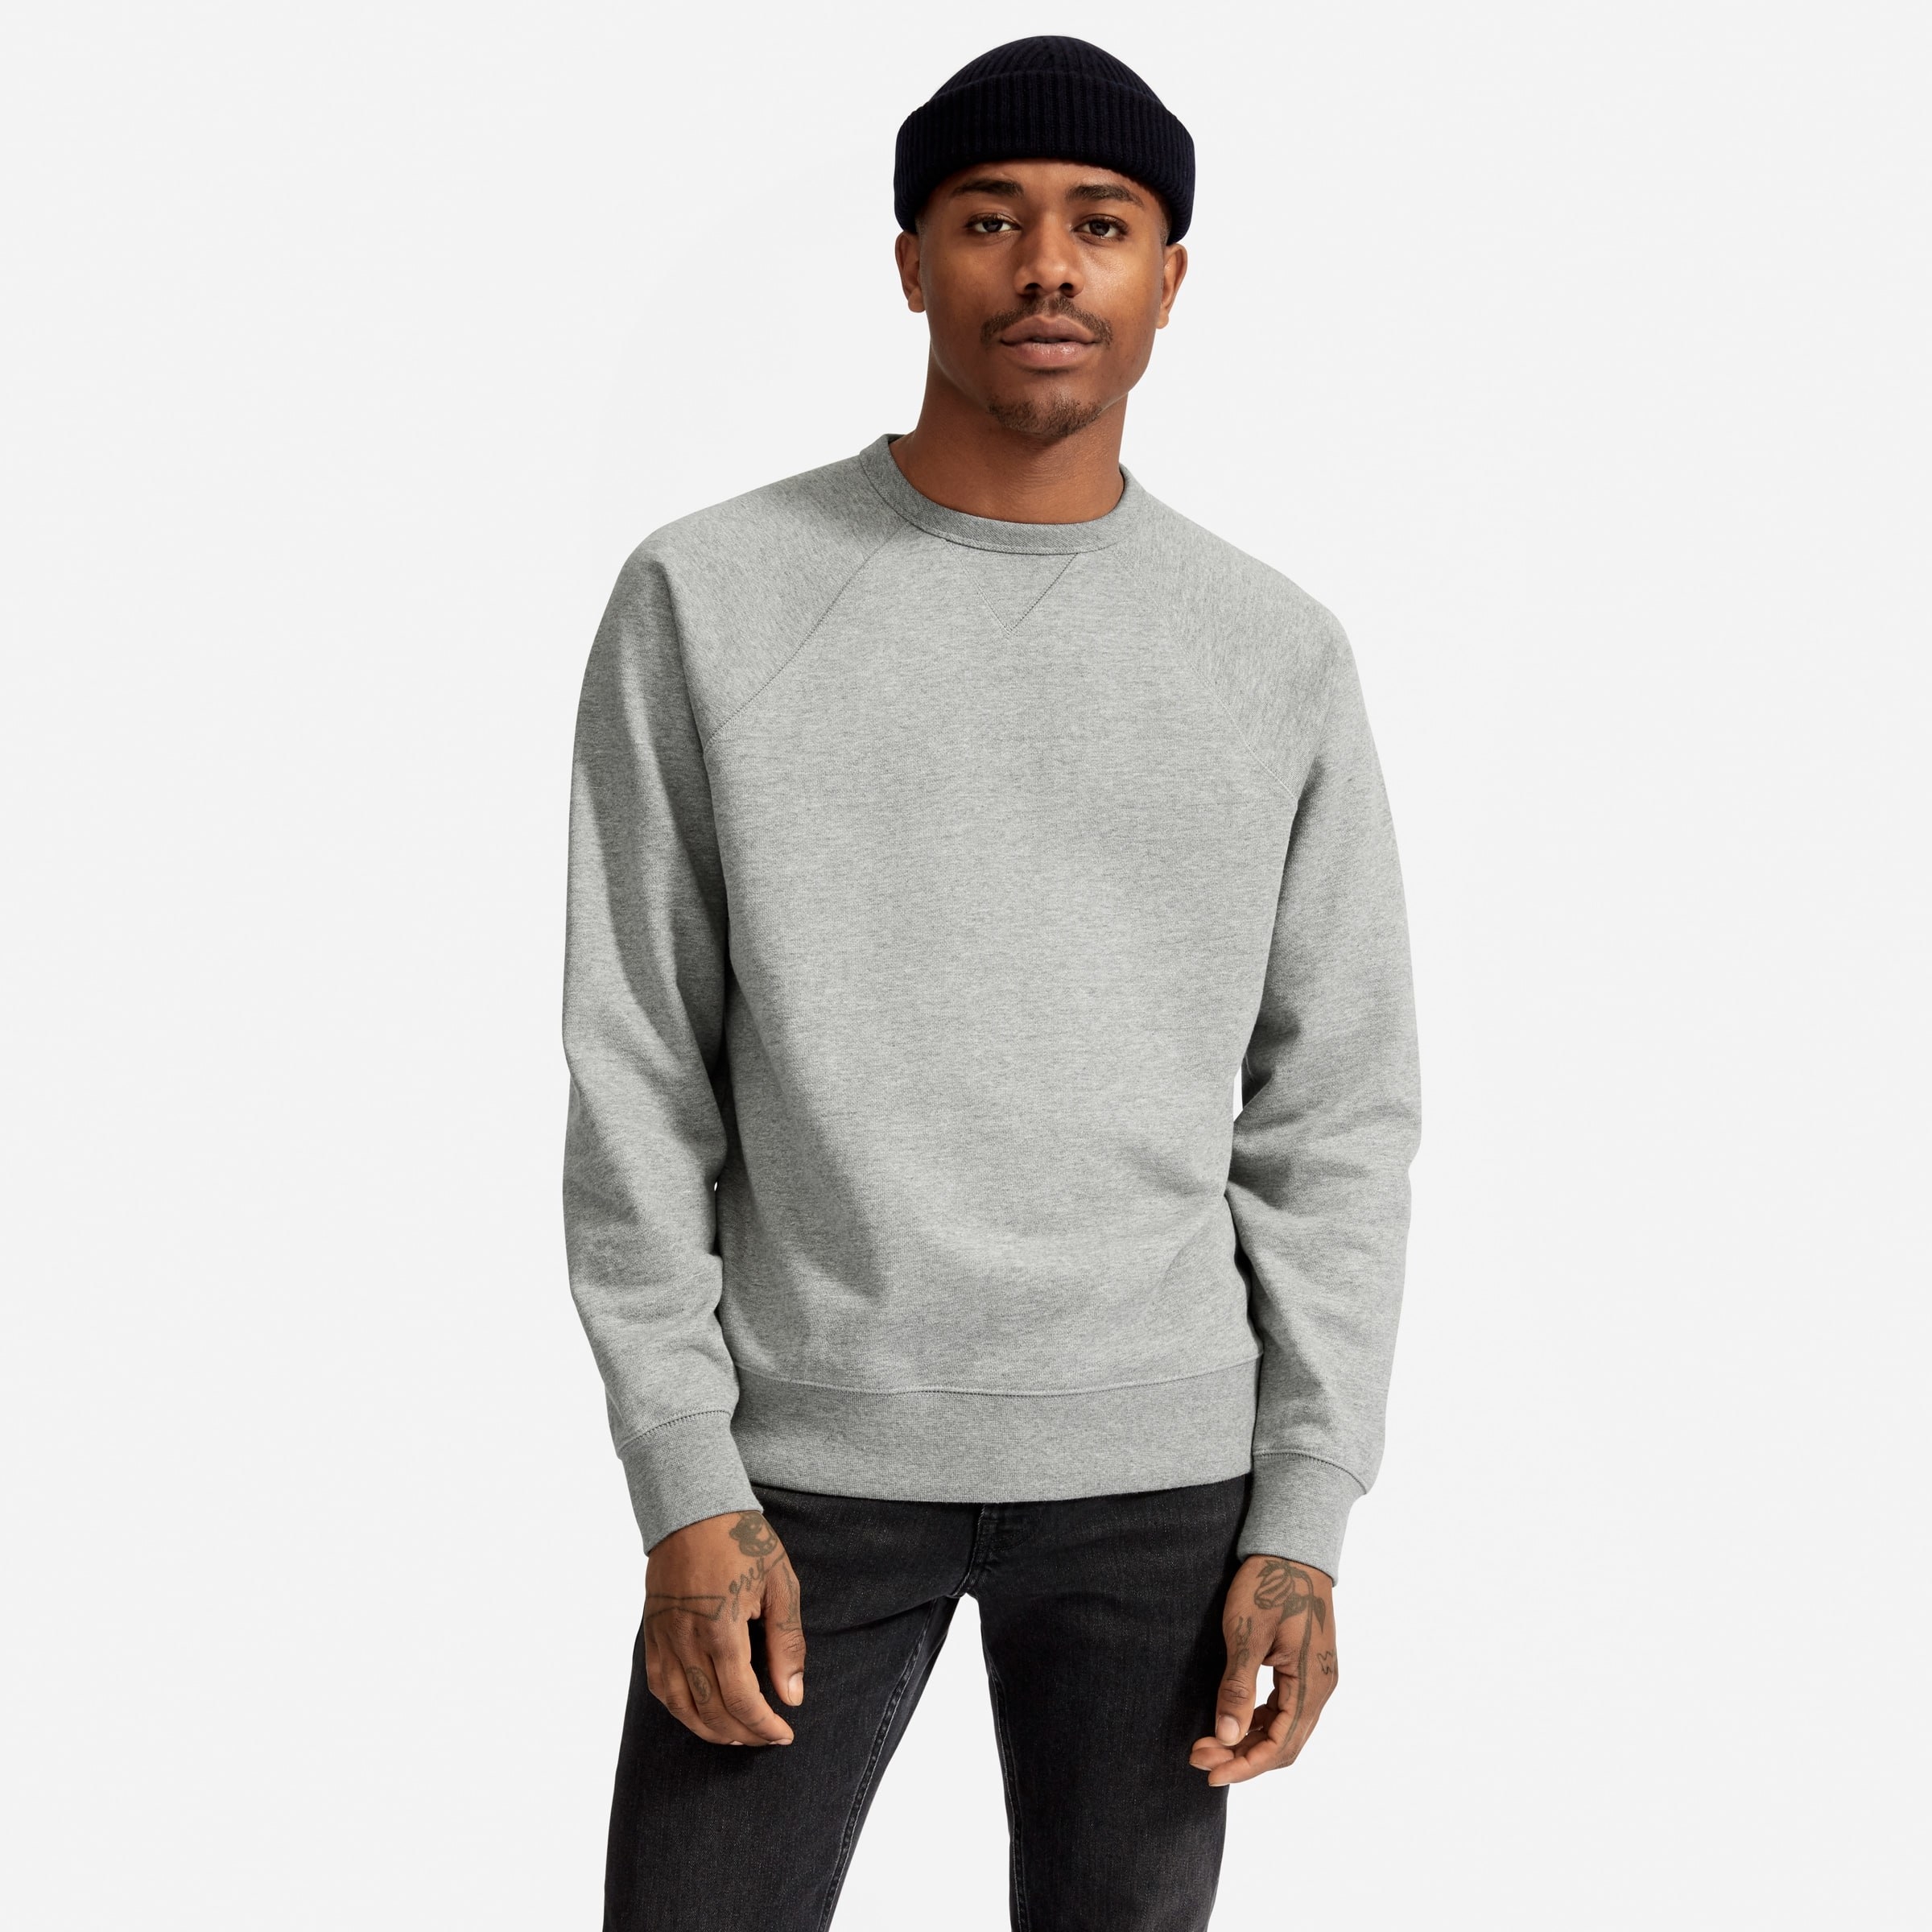 21 Clothing Items From Everlane That People Love